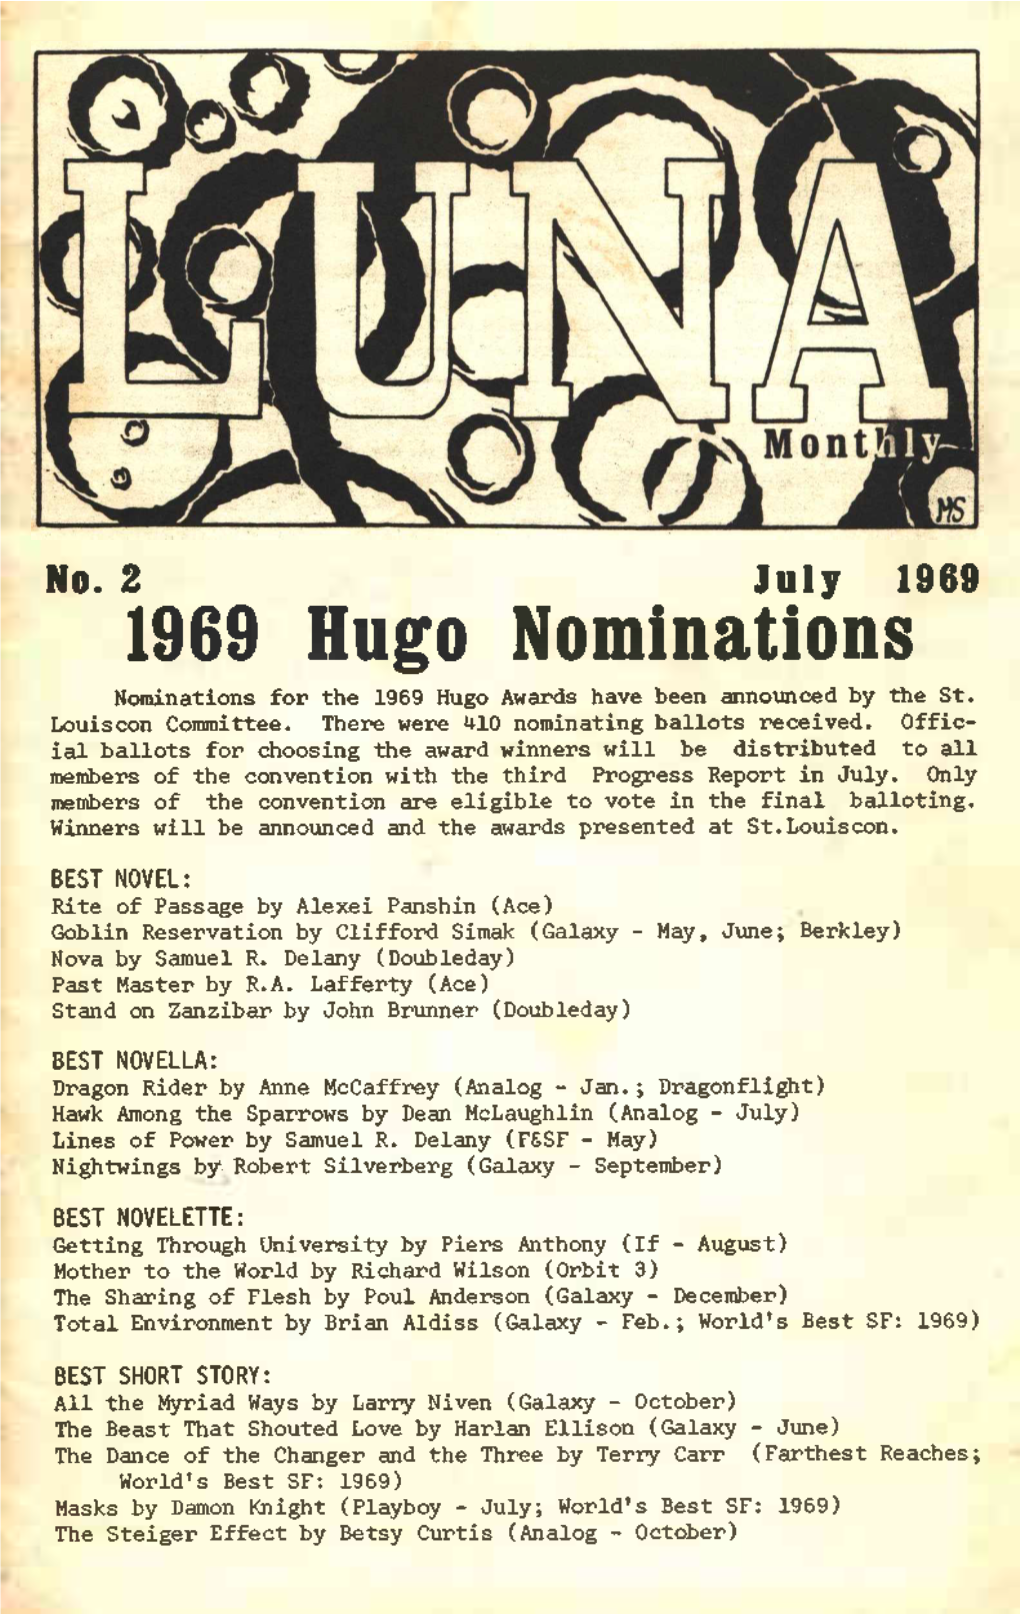 1969 Hugo Nominations Nominations for the 1969 Hugo Awards Have Been Announced by the St